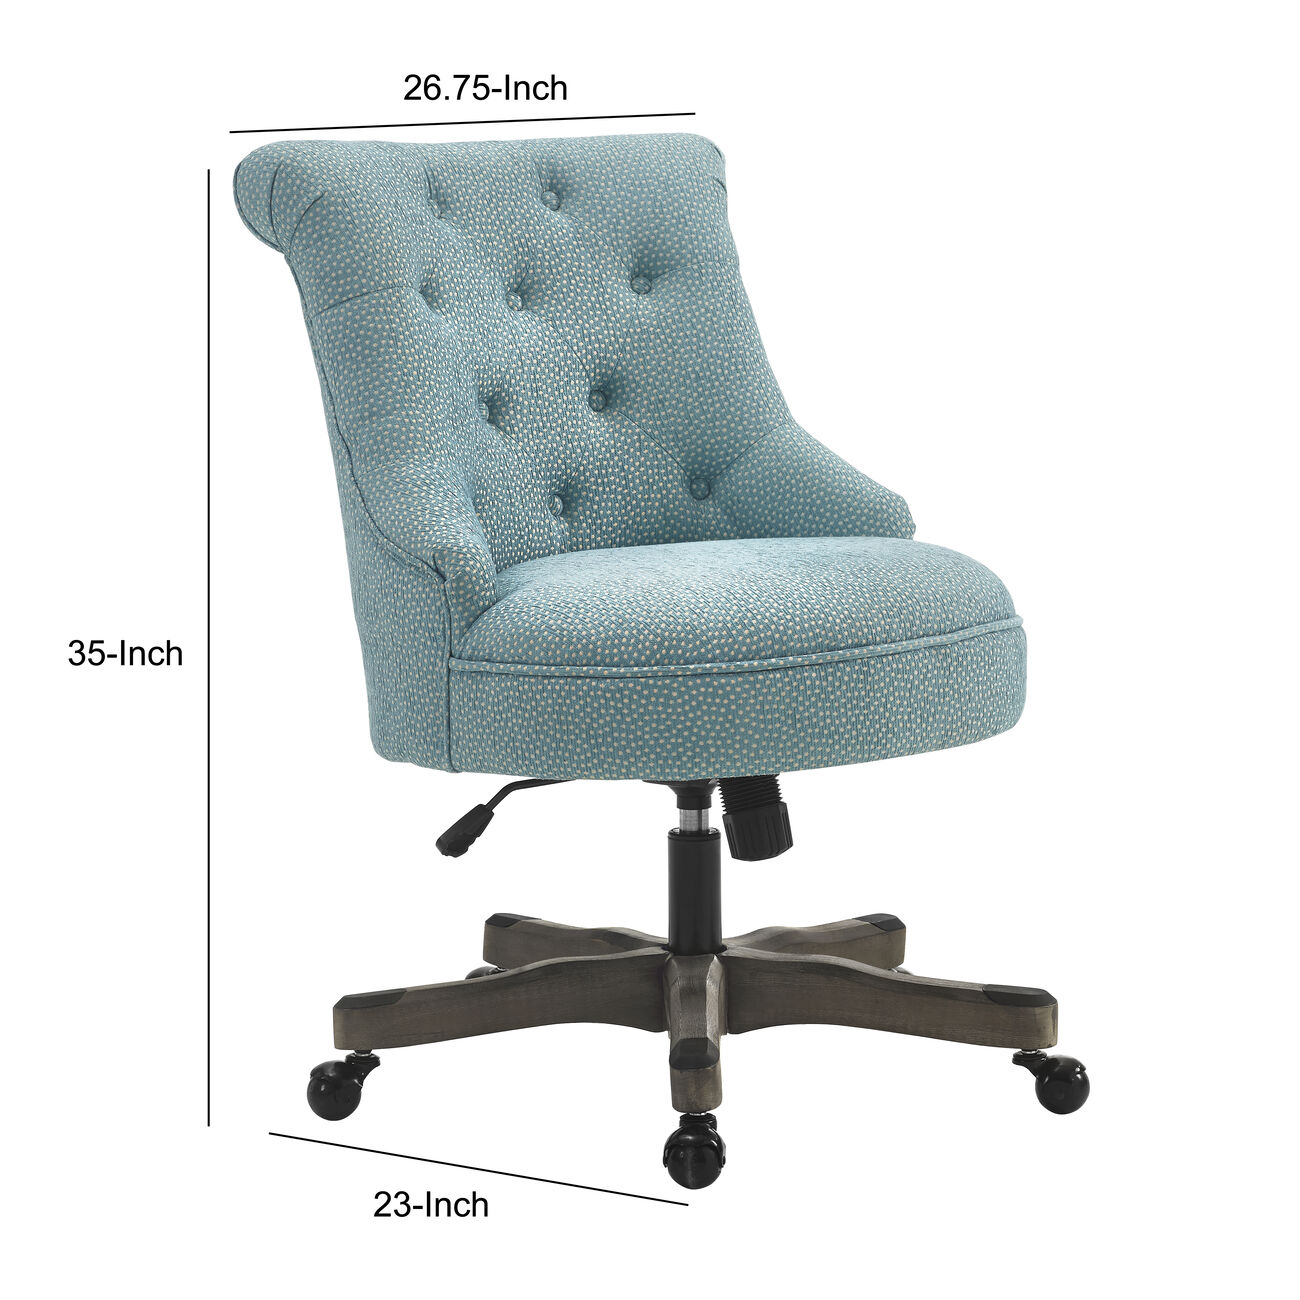 Wooden Office Chair with Textured Fabric Upholstery, Blue and Gray